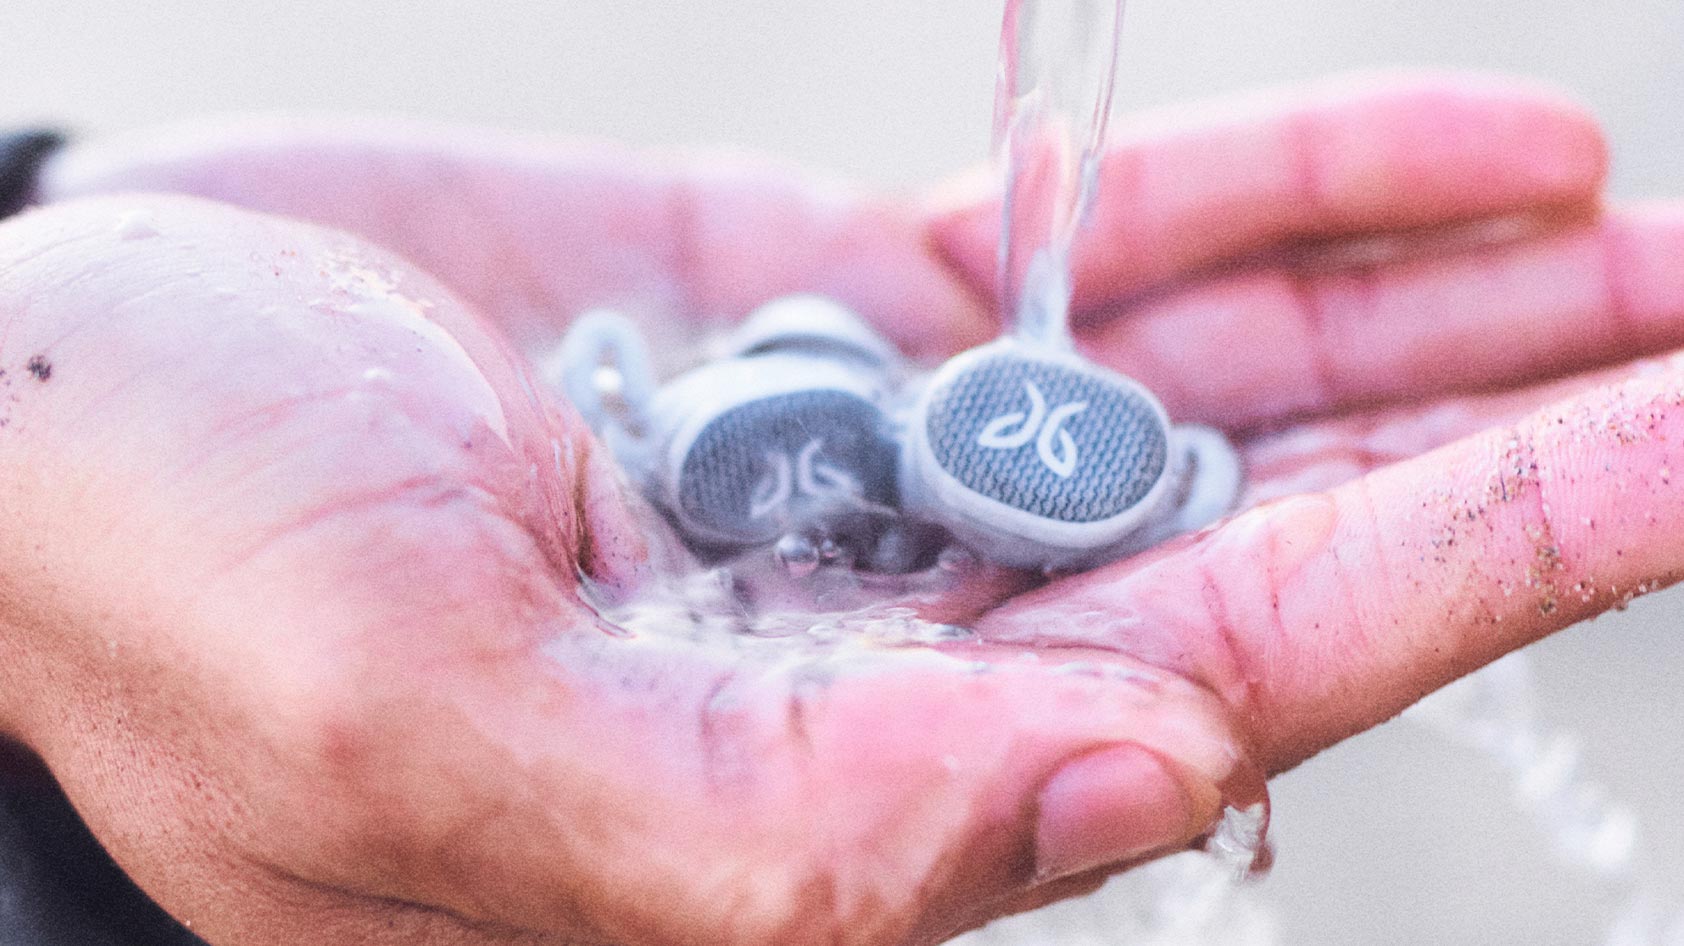 A hand holds the Jaybird Vista 2 true wireless workout earbuds as a stream of water pours down onto them.